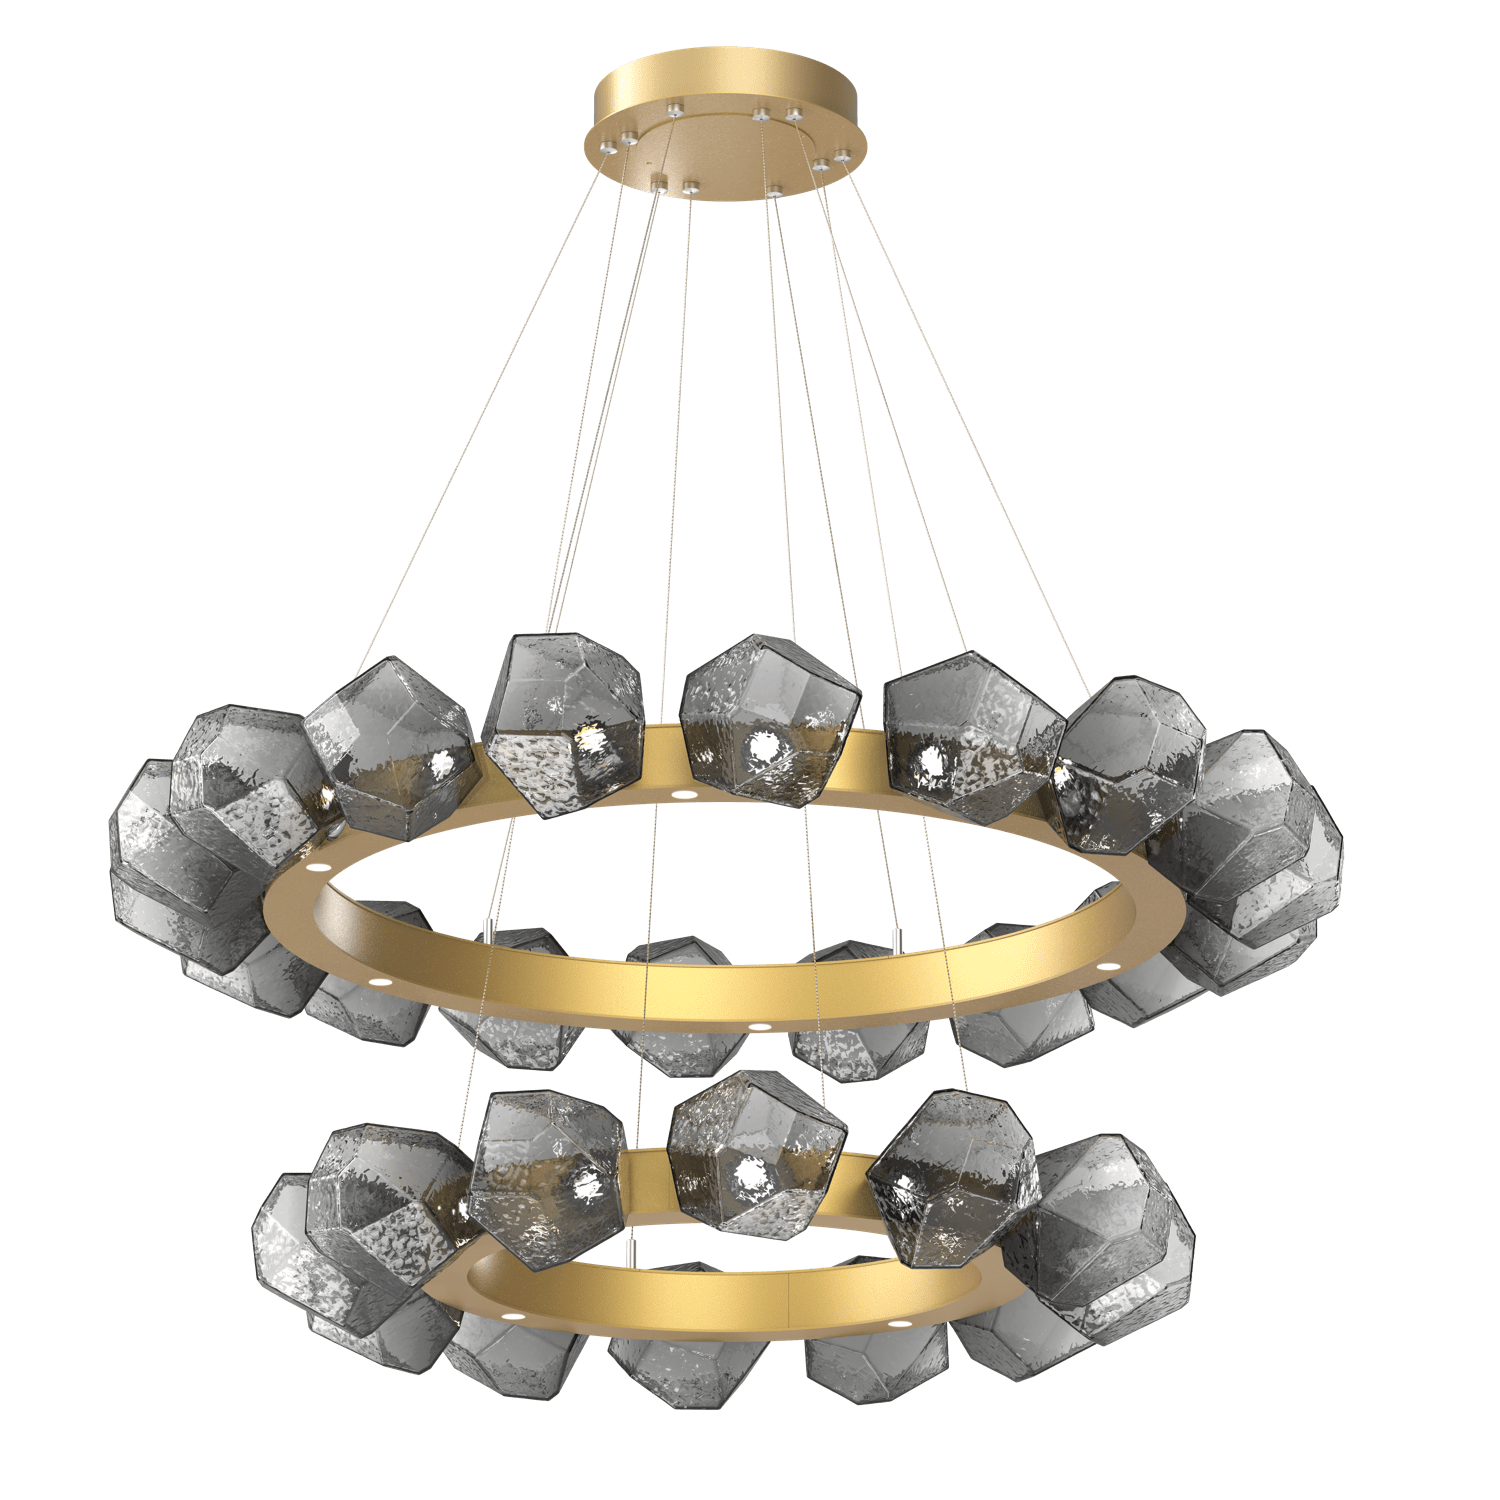 CHB0039-2T-GB-S-Hammerton-Studio-Gem-48-inch-two-tier-radial-ring-chandelier-with-gilded-brass-finish-and-smoke-blown-glass-shades-and-LED-lamping